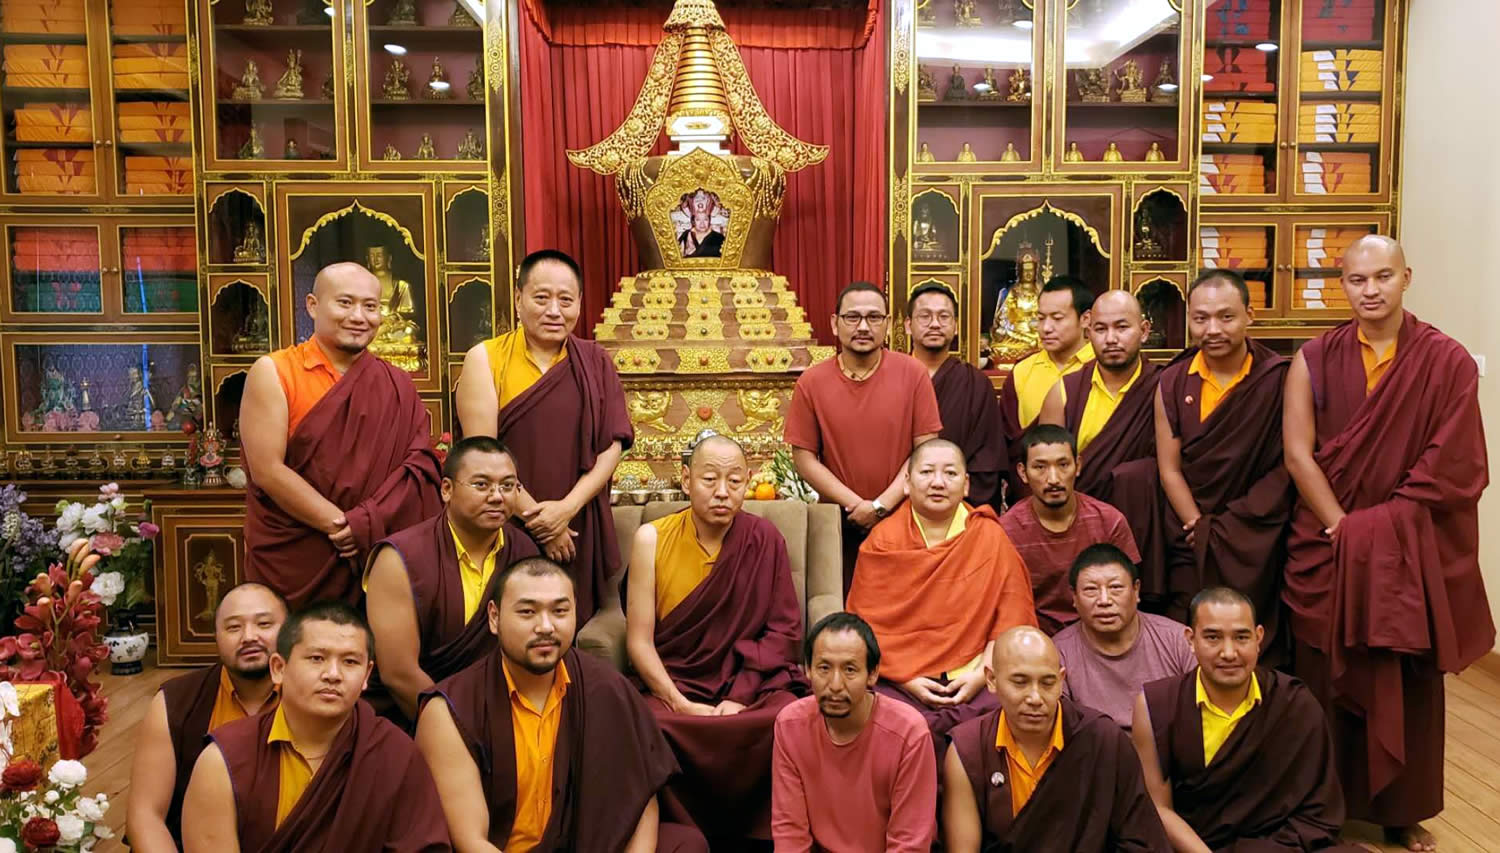 News from Mindrolling Monastery, June 2019